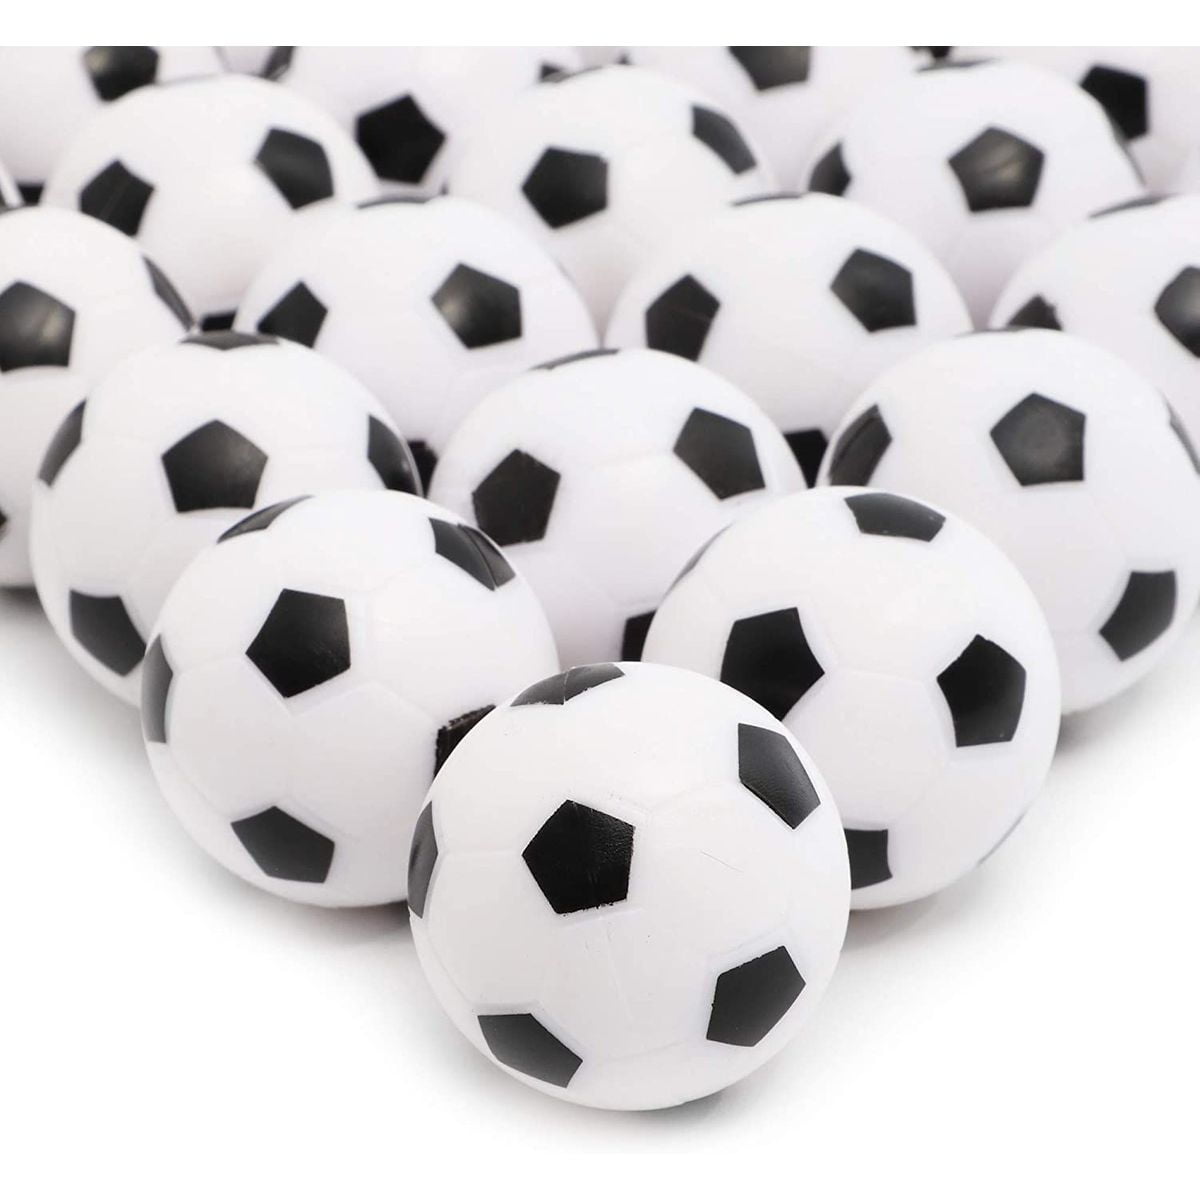 Rong Foosball Balls Official Table Soccer Replacement Balls Tournament Quality